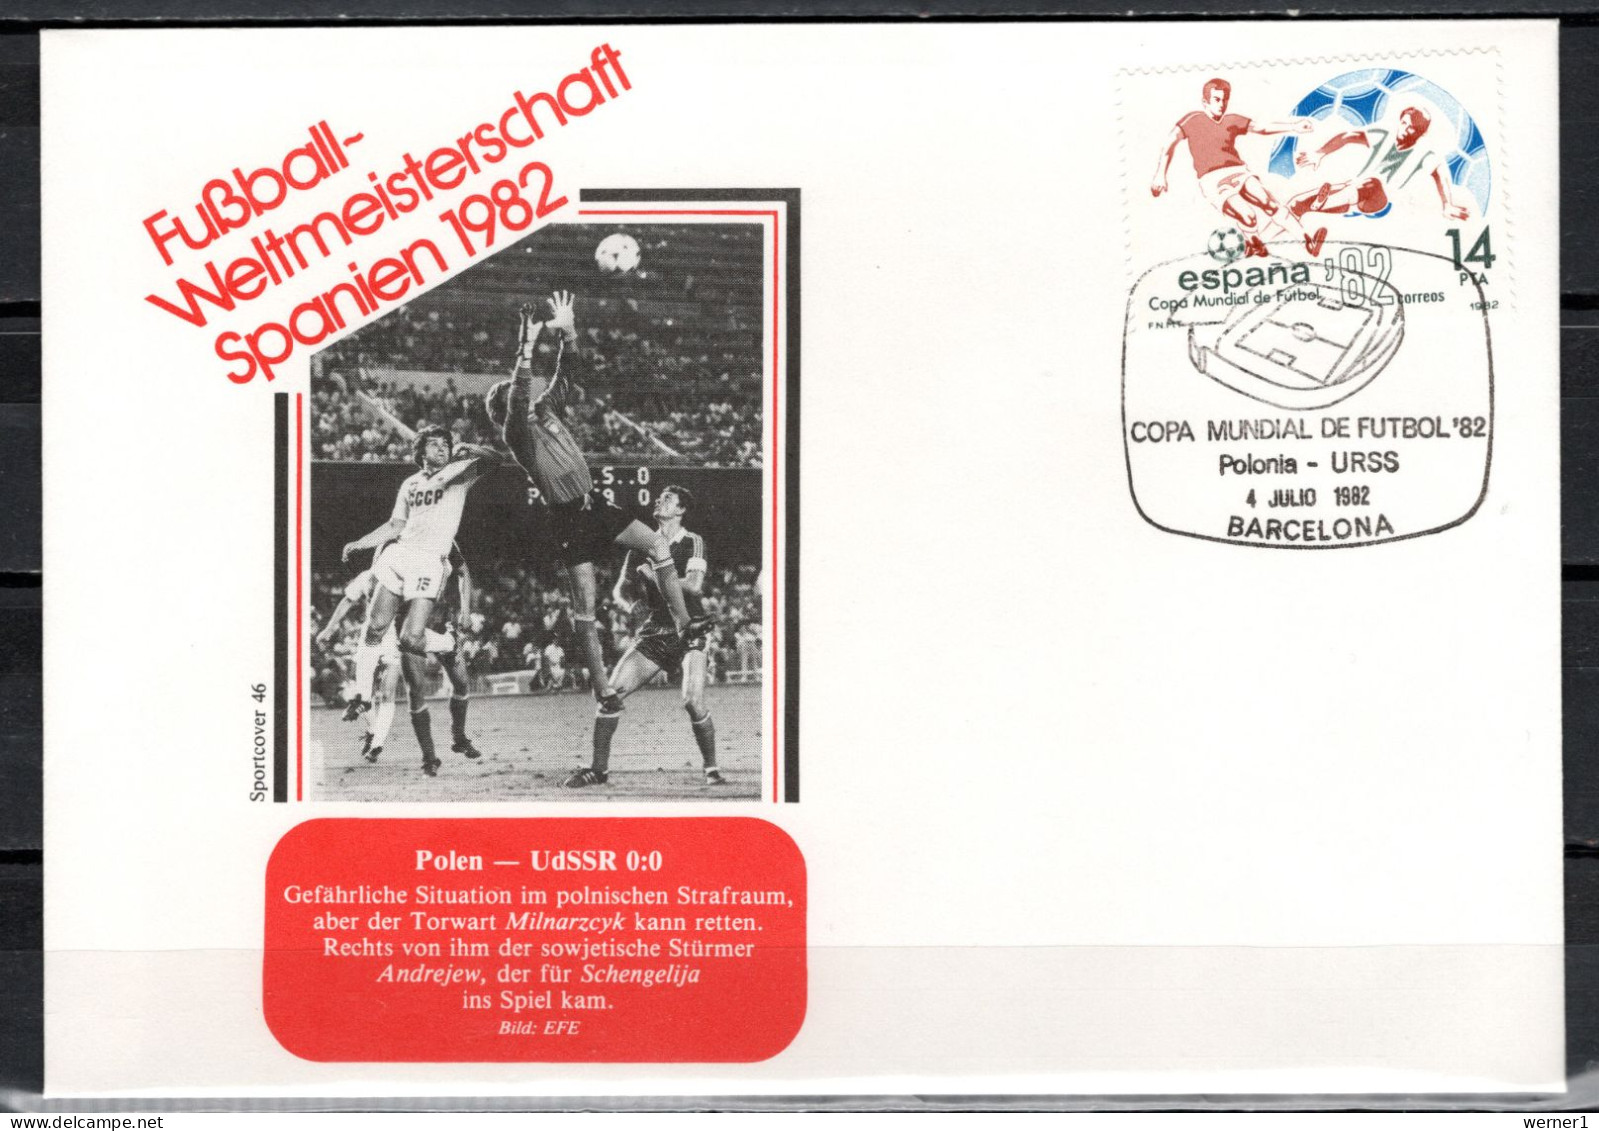 Spain 1982 Football Soccer World Cup Commemorative Cover Match Poland - USSR 0:0 - 1982 – Spain